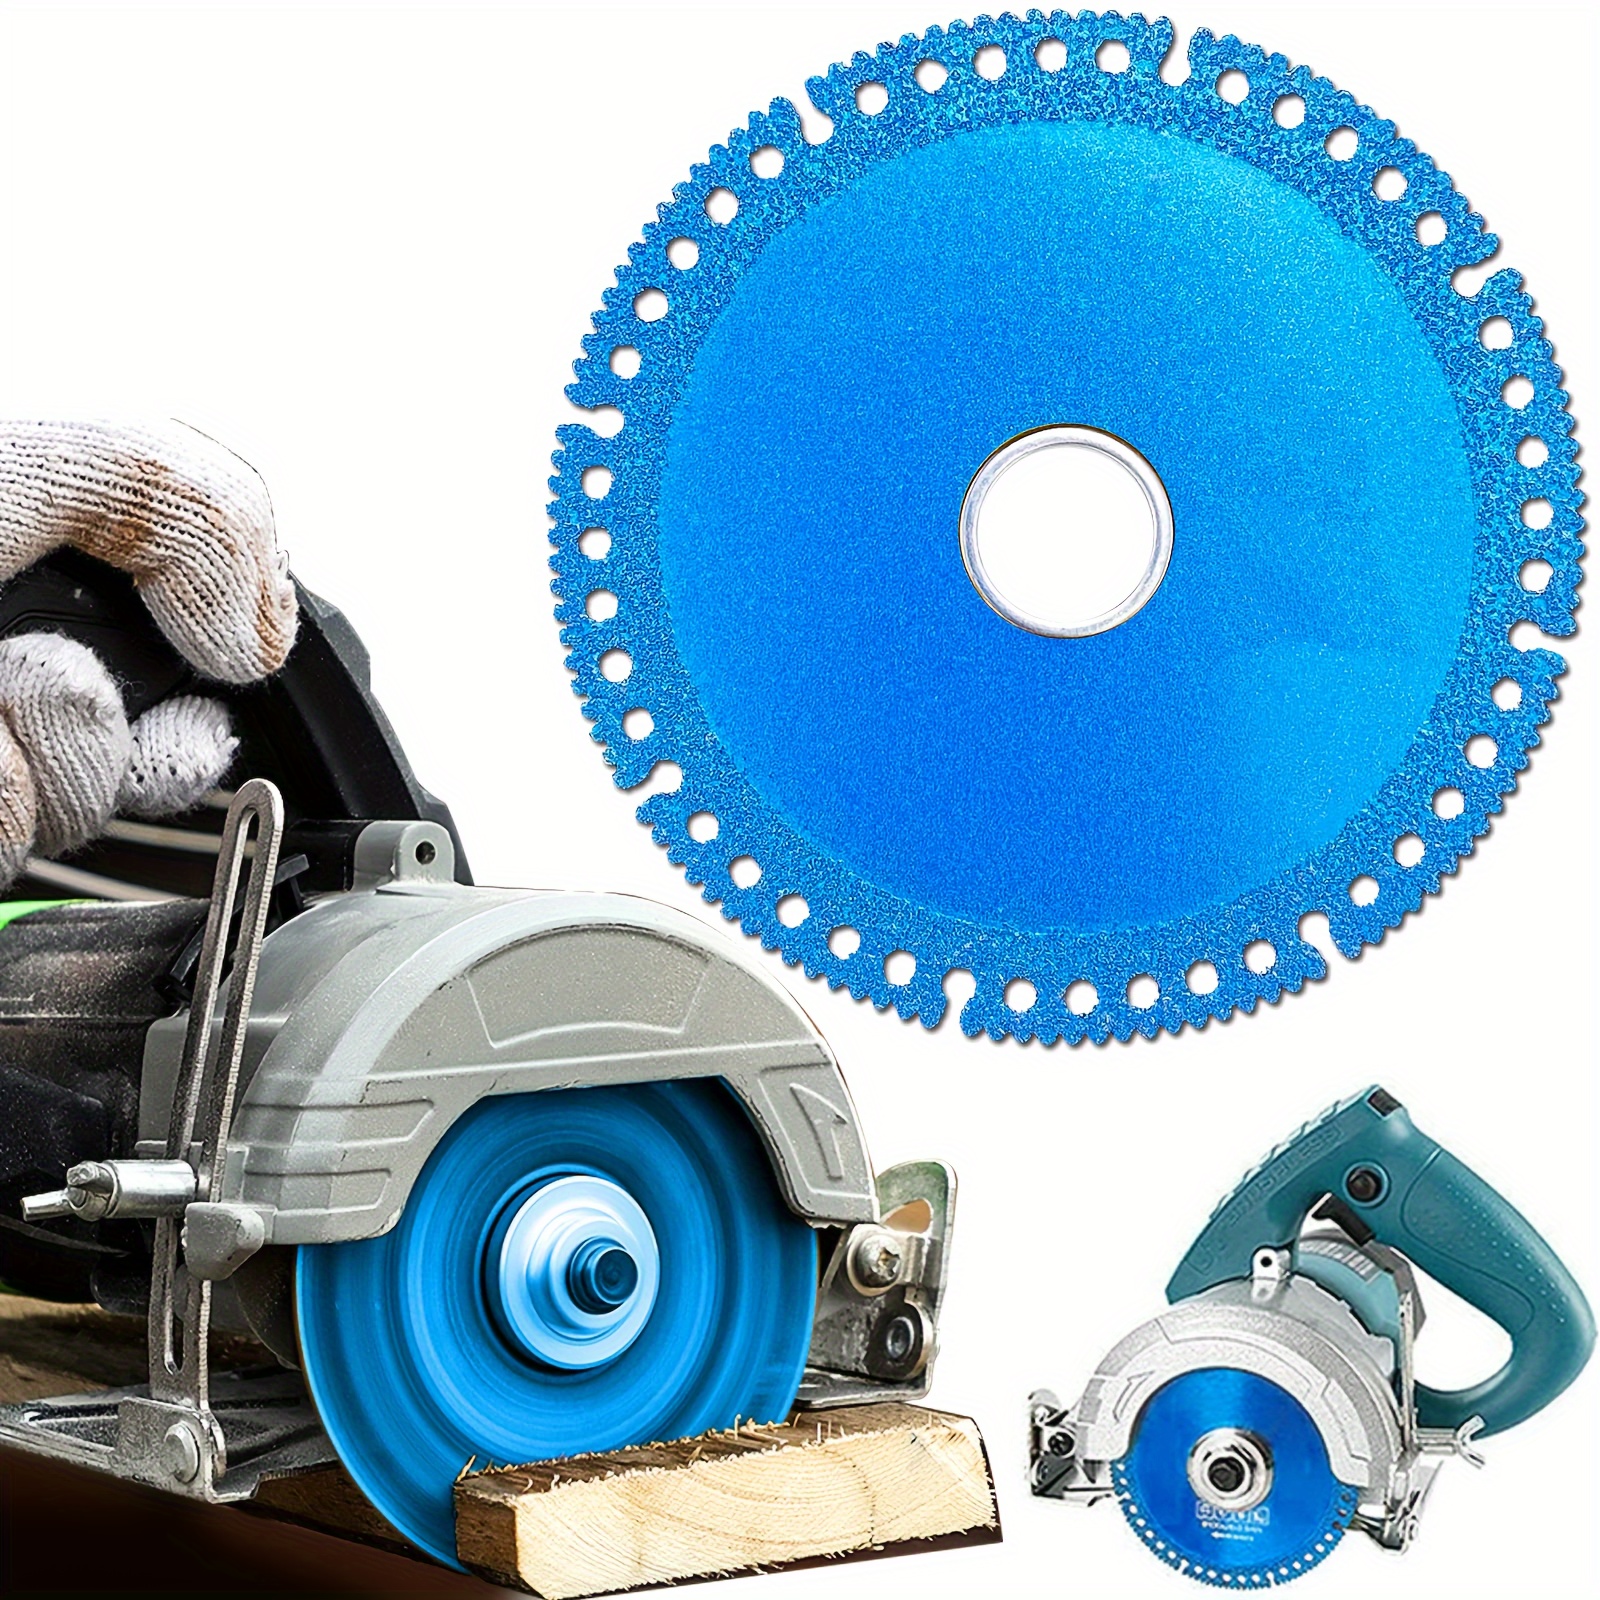 

1pc/5pcs Blue Indestructible Disc: Cut Everything In Seconds With Diamond Cutting Wheels For Smooth Cutting, Grinding & Chamfering Of Ceramic Tile, Marble, Slate, Pvc Pipe & Wood!